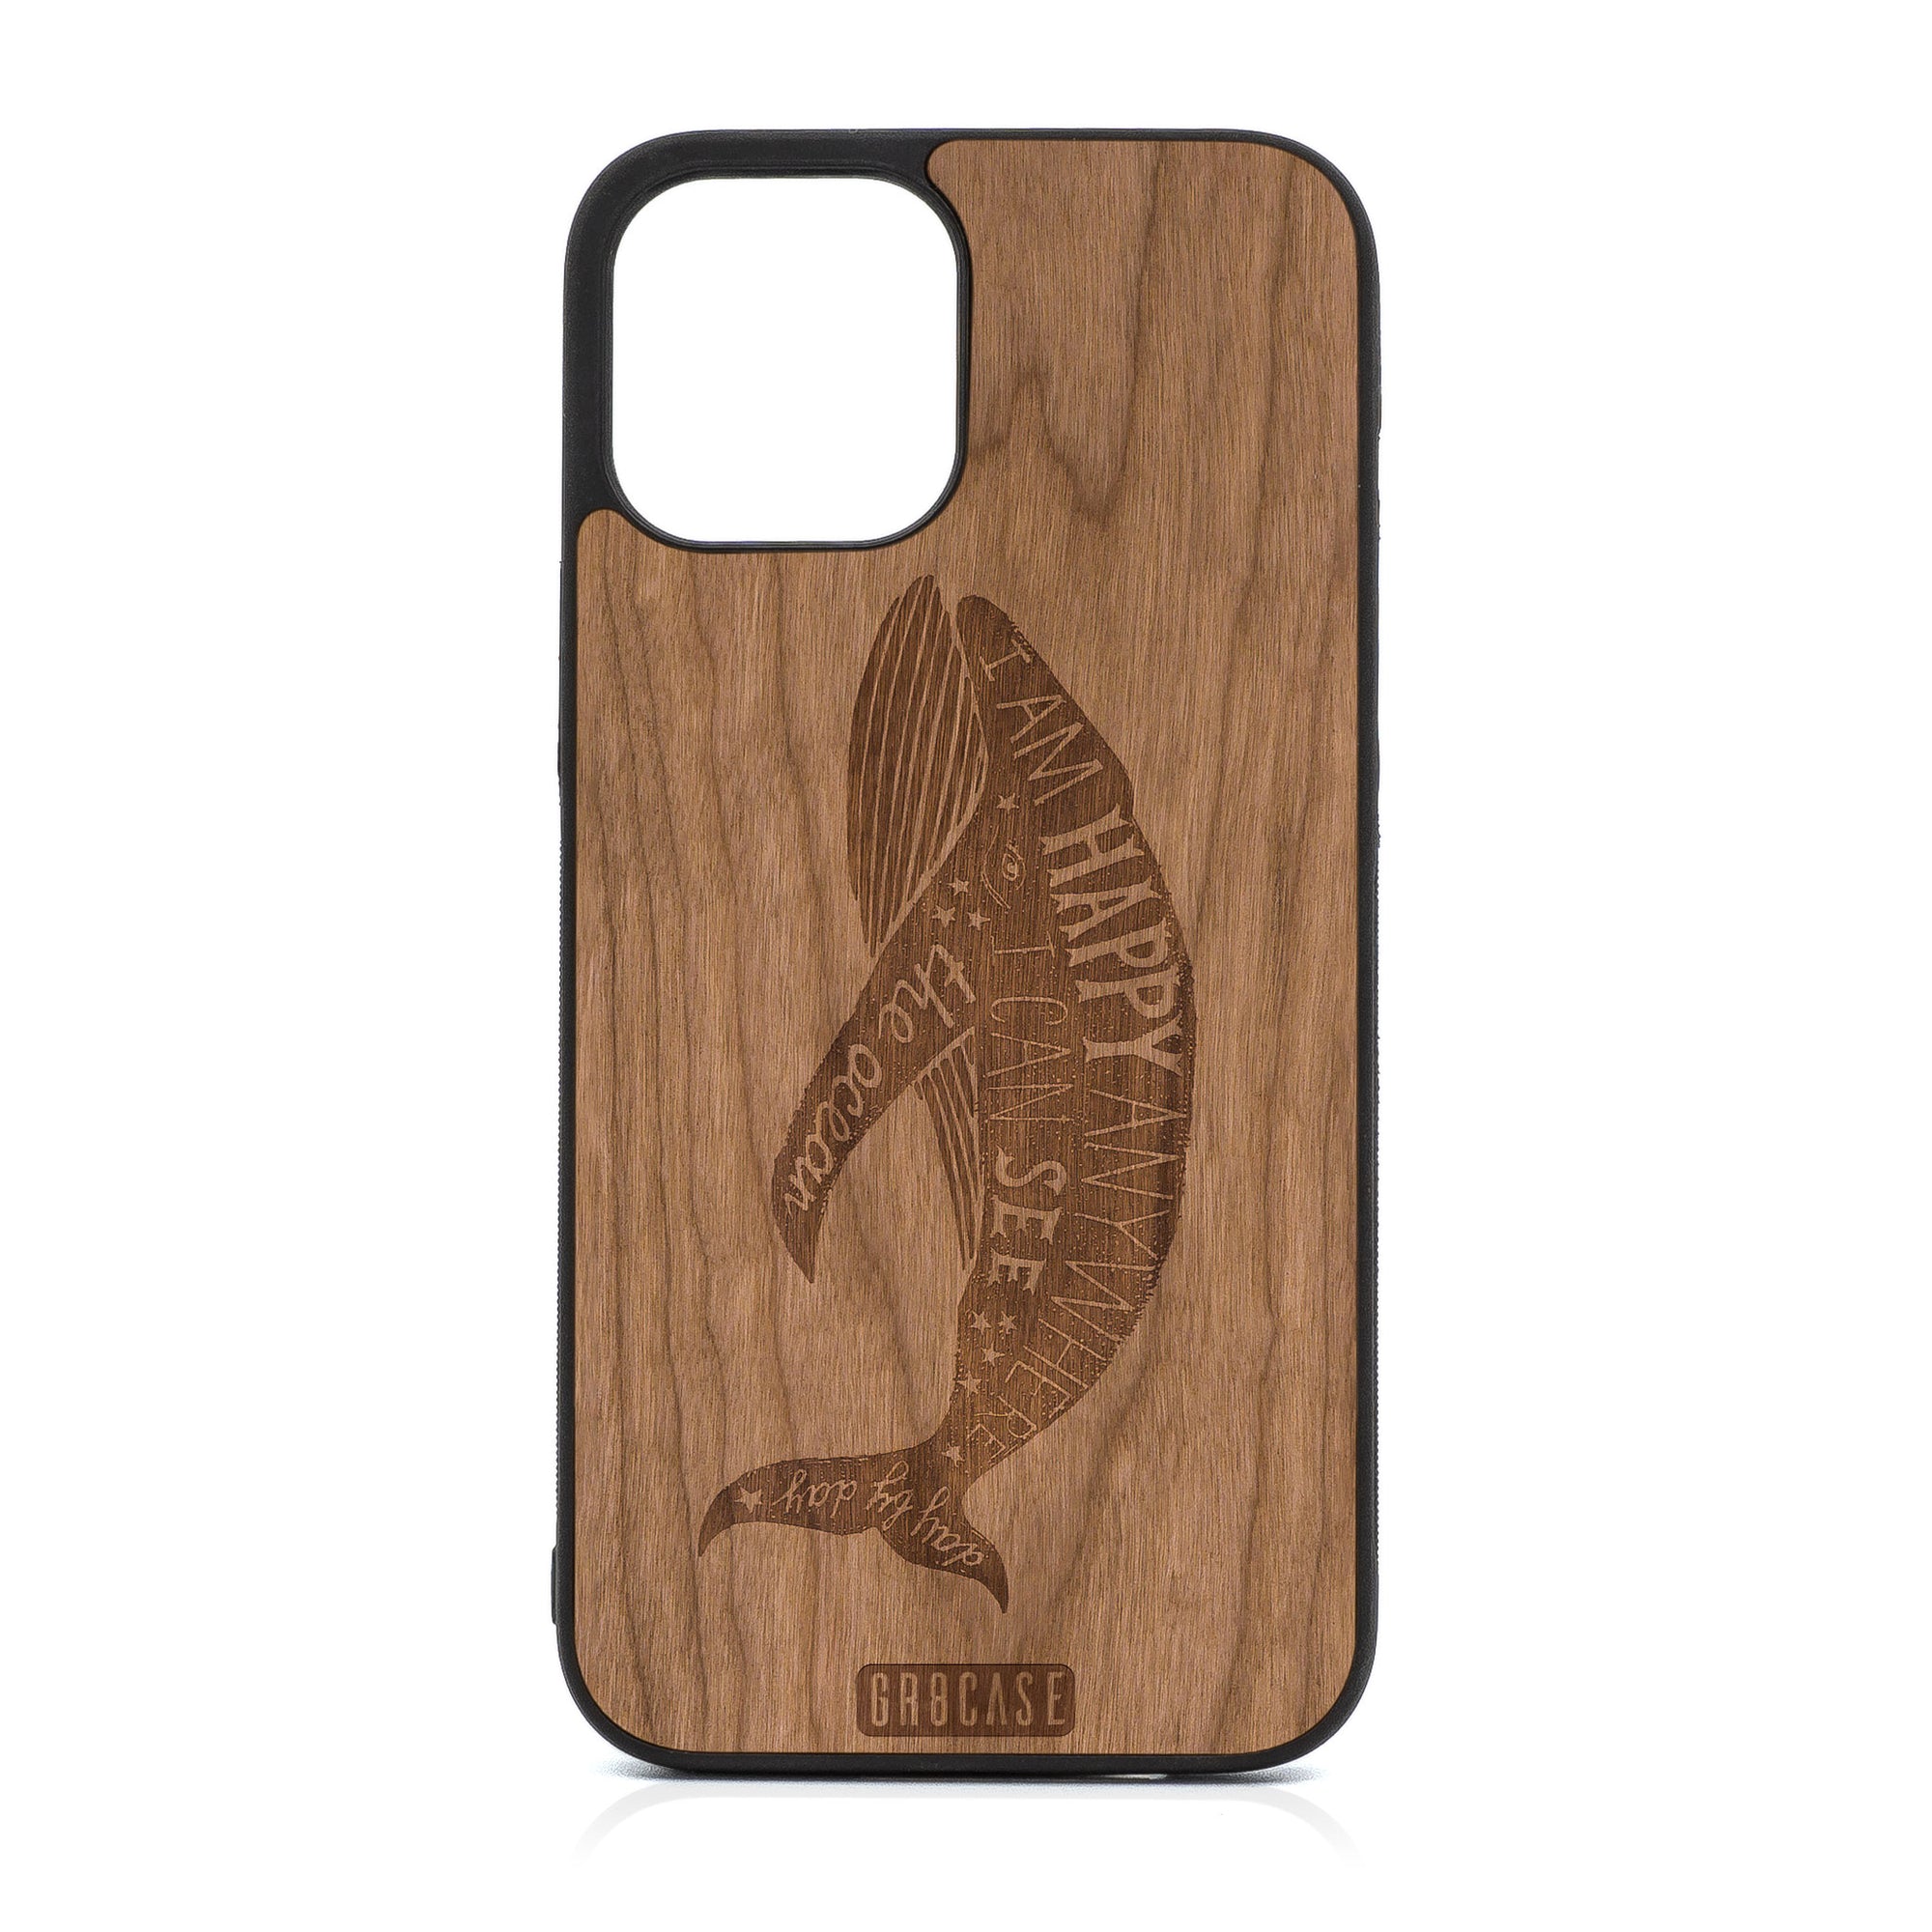 I'm Happy Anywhere I Can See The Ocean (Whale) Design Wood Case For iPhone 12 Pro Max